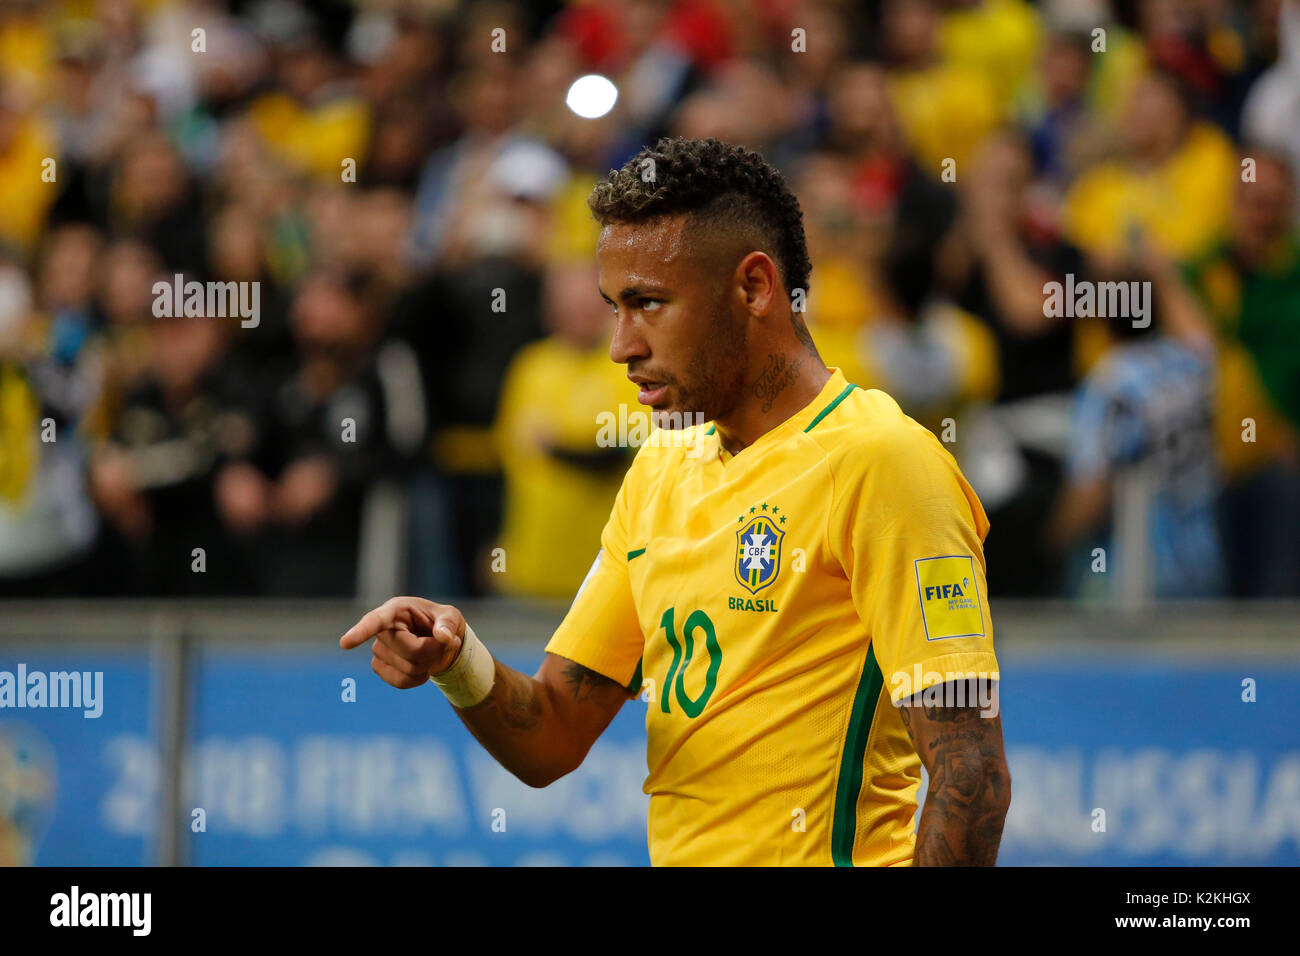 Porto Alegre, Brazil. 31st Aug, 2017. Neymar Jr. of Brazil during the match Brazil v Equador - 2018 FIFA World Cup Russia Qualifier, at Arena do Gremio on August 31, 2017, in Porto Alegre, Brazil. (PHOTO: PAULO LISBOA/BRAZIL PHOTO PRESS) Stock Photo